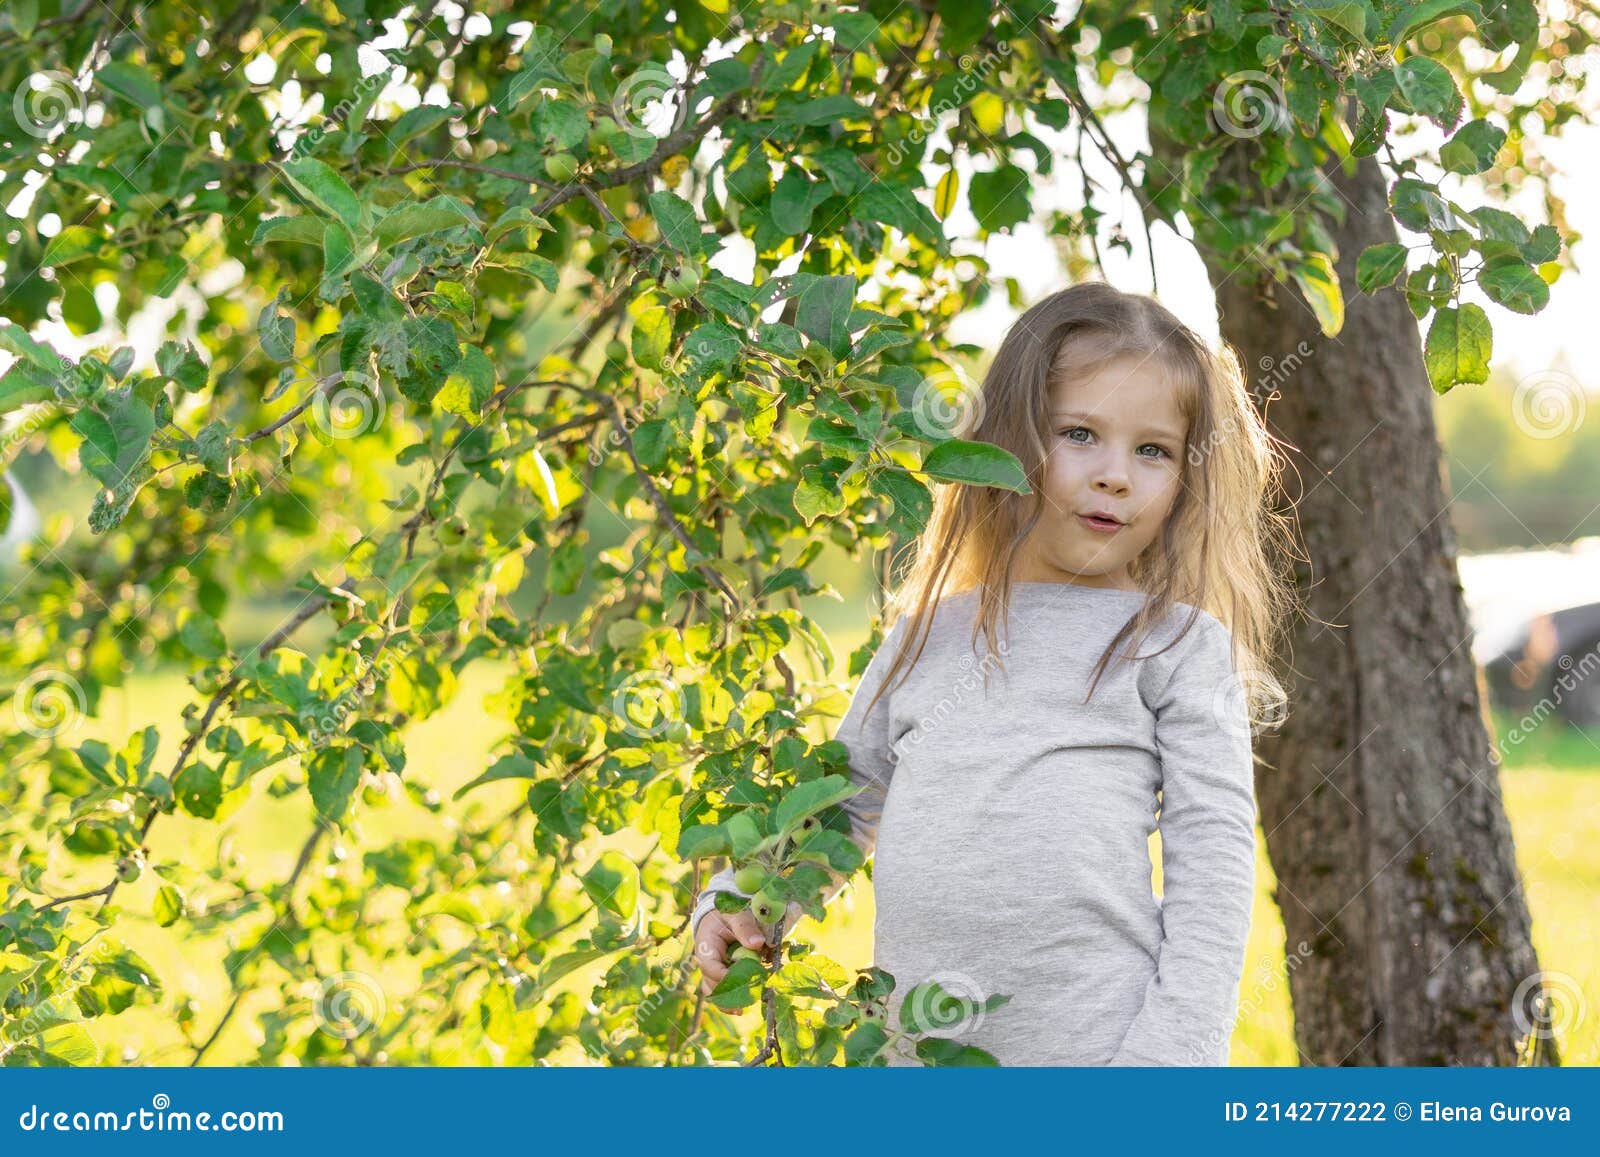 Cute Caucasian Little Girl in the Country Stock Photo - Image of dress ...